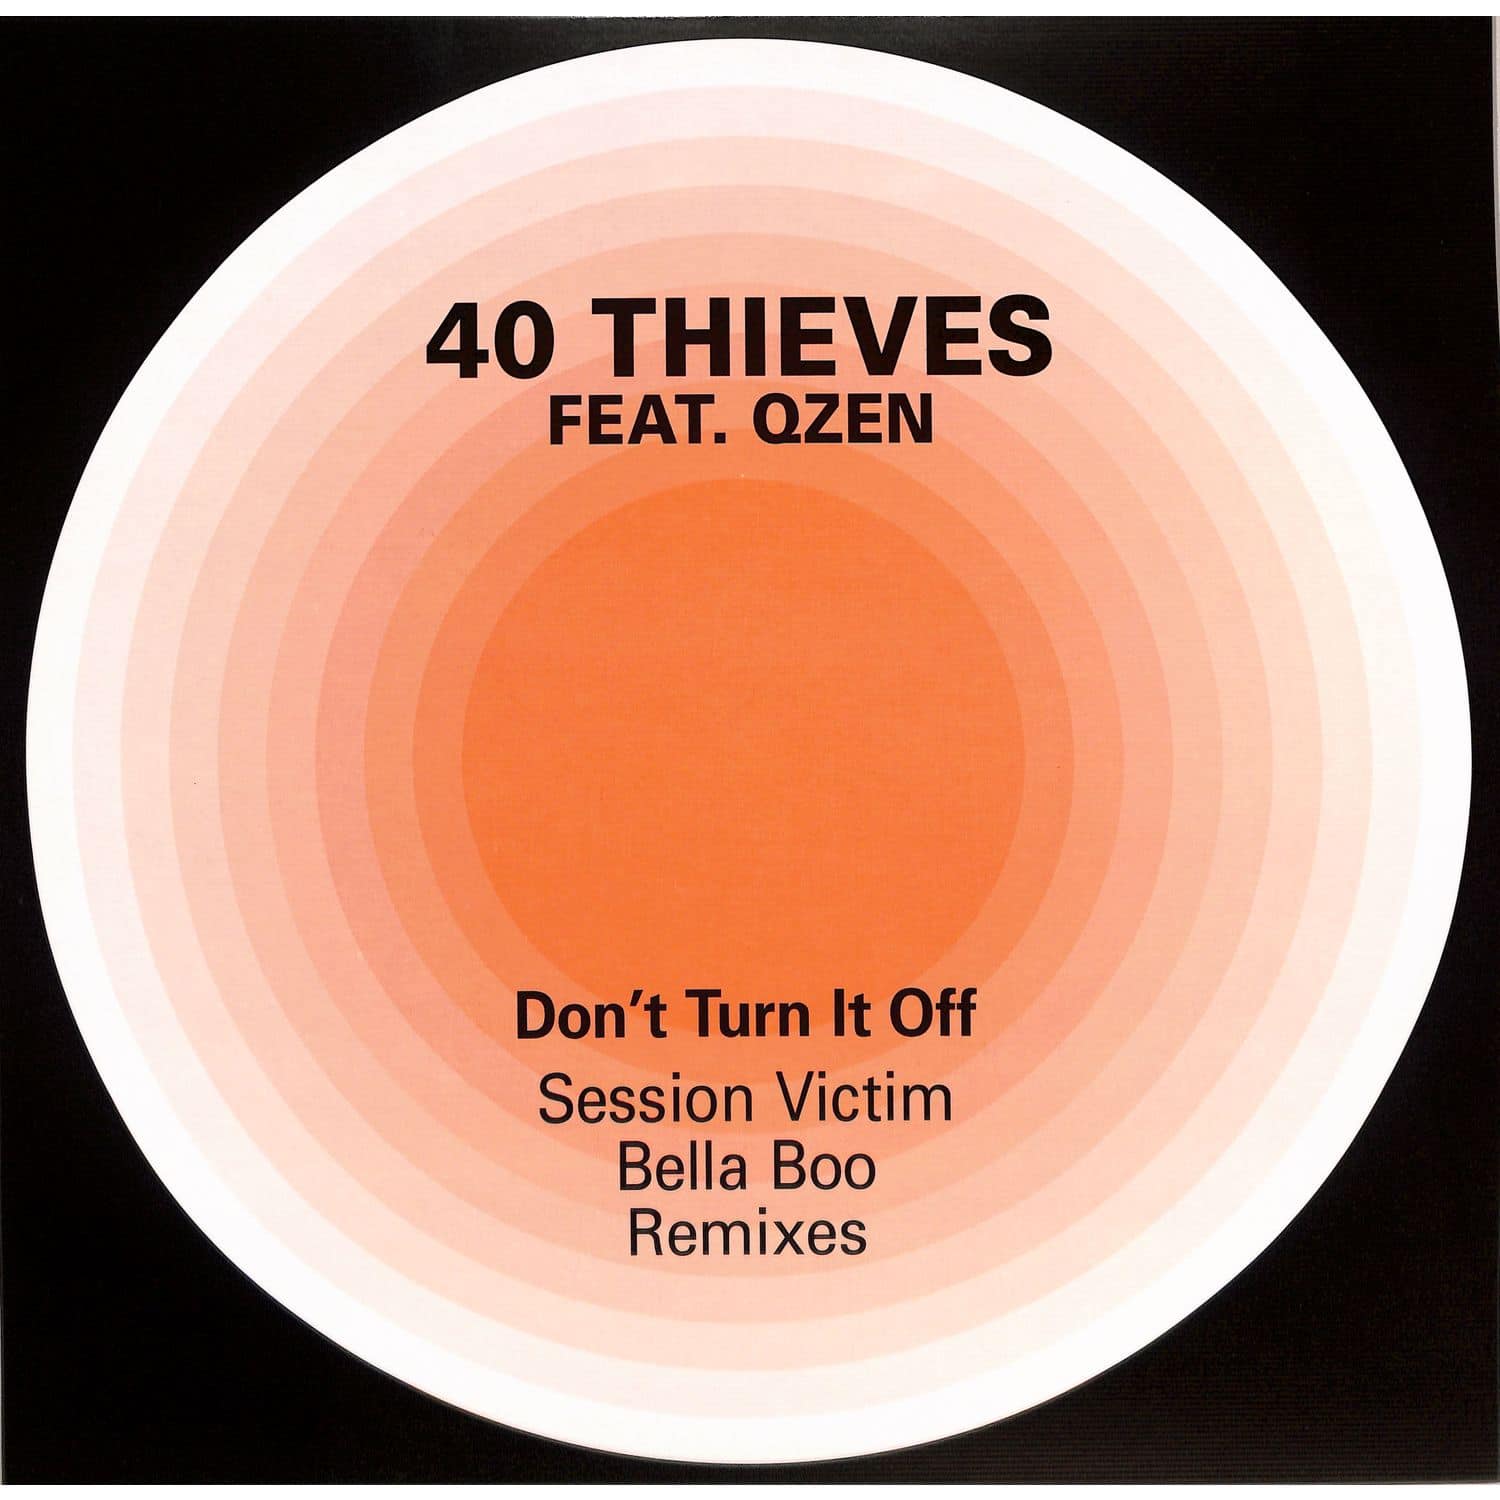 40 Thieves Feat Qzen - DONT TURN IT OFF